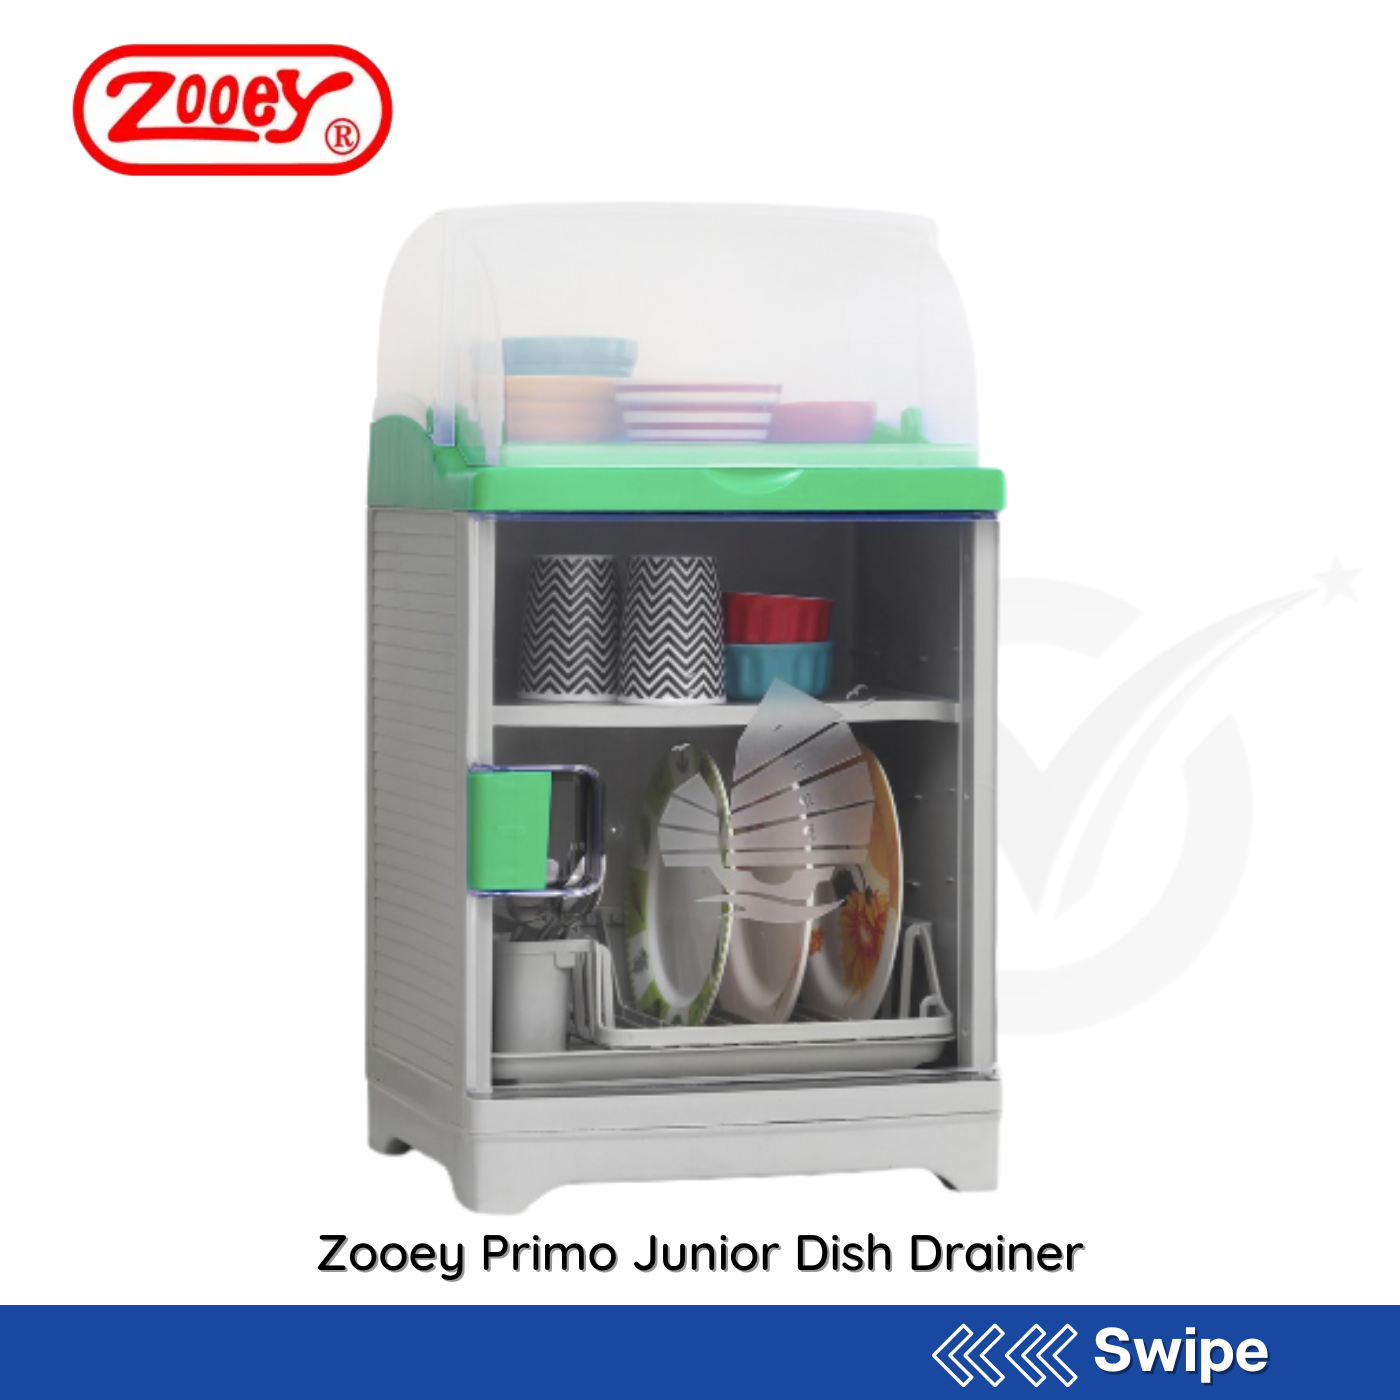 Zooey Primo Junior Dish Drainer - People's Choice Marketing